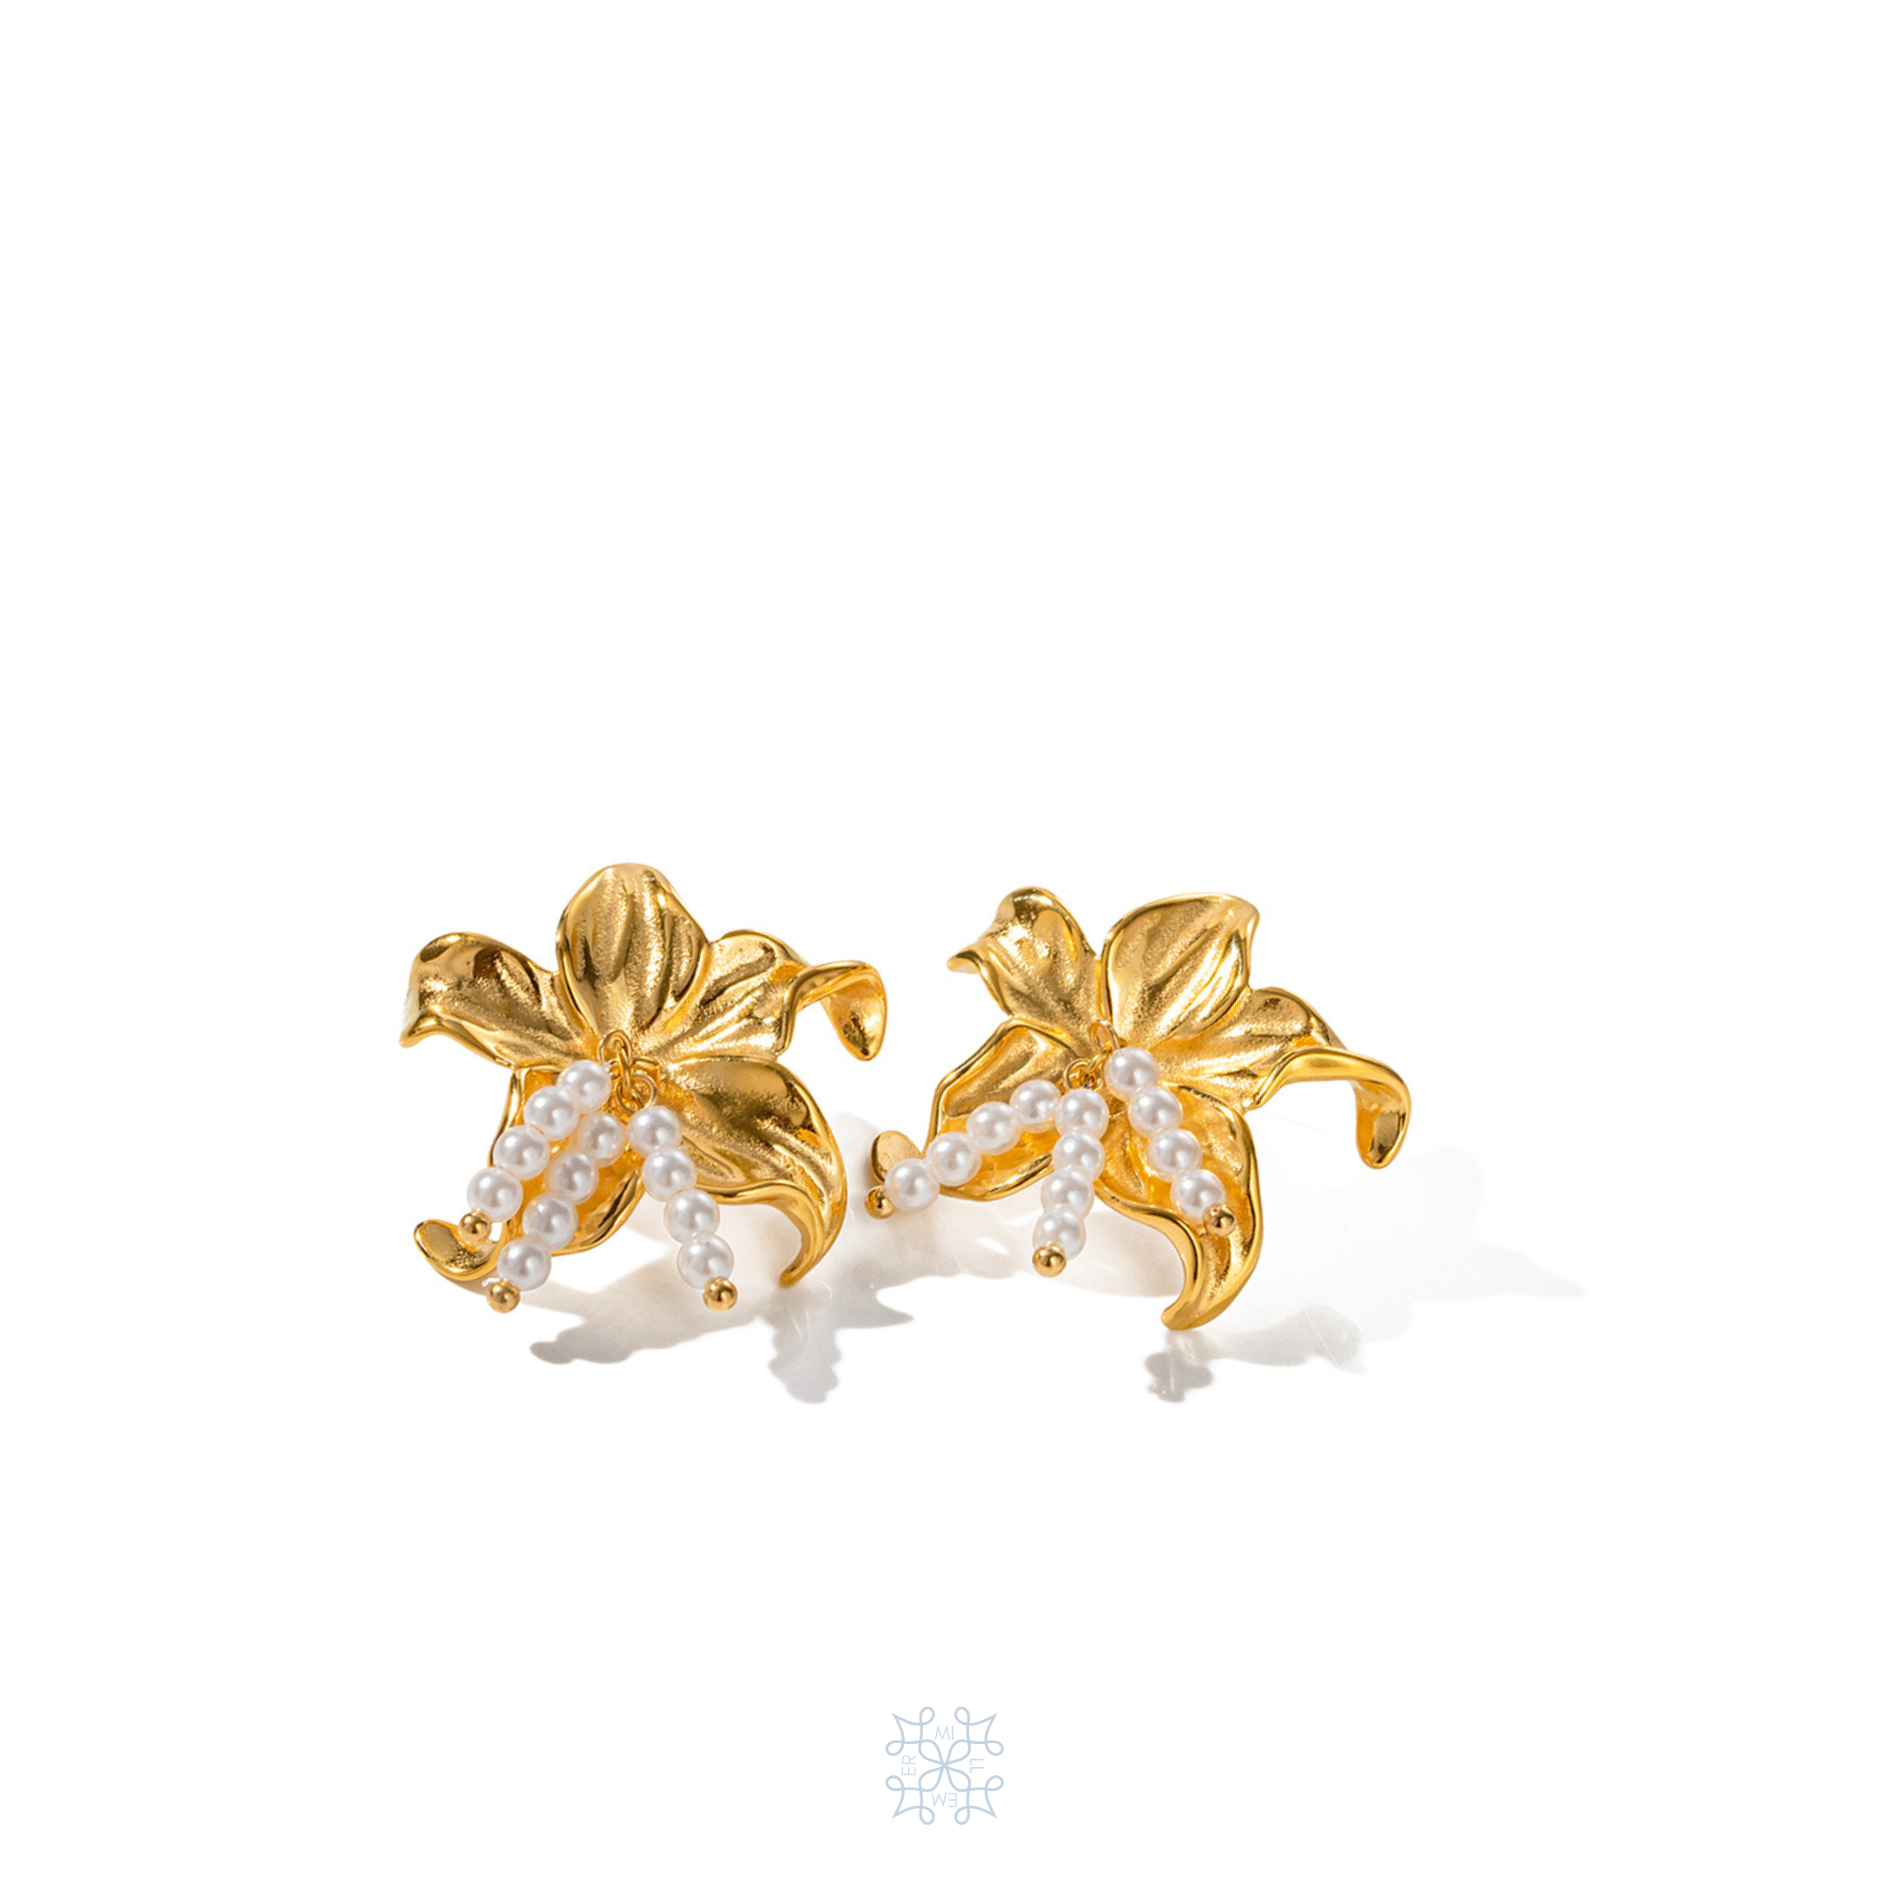 Gold Waterproof Earrings - In the shape of a bllomig Dadoffil Flower whith white pearls in the middle of the flower